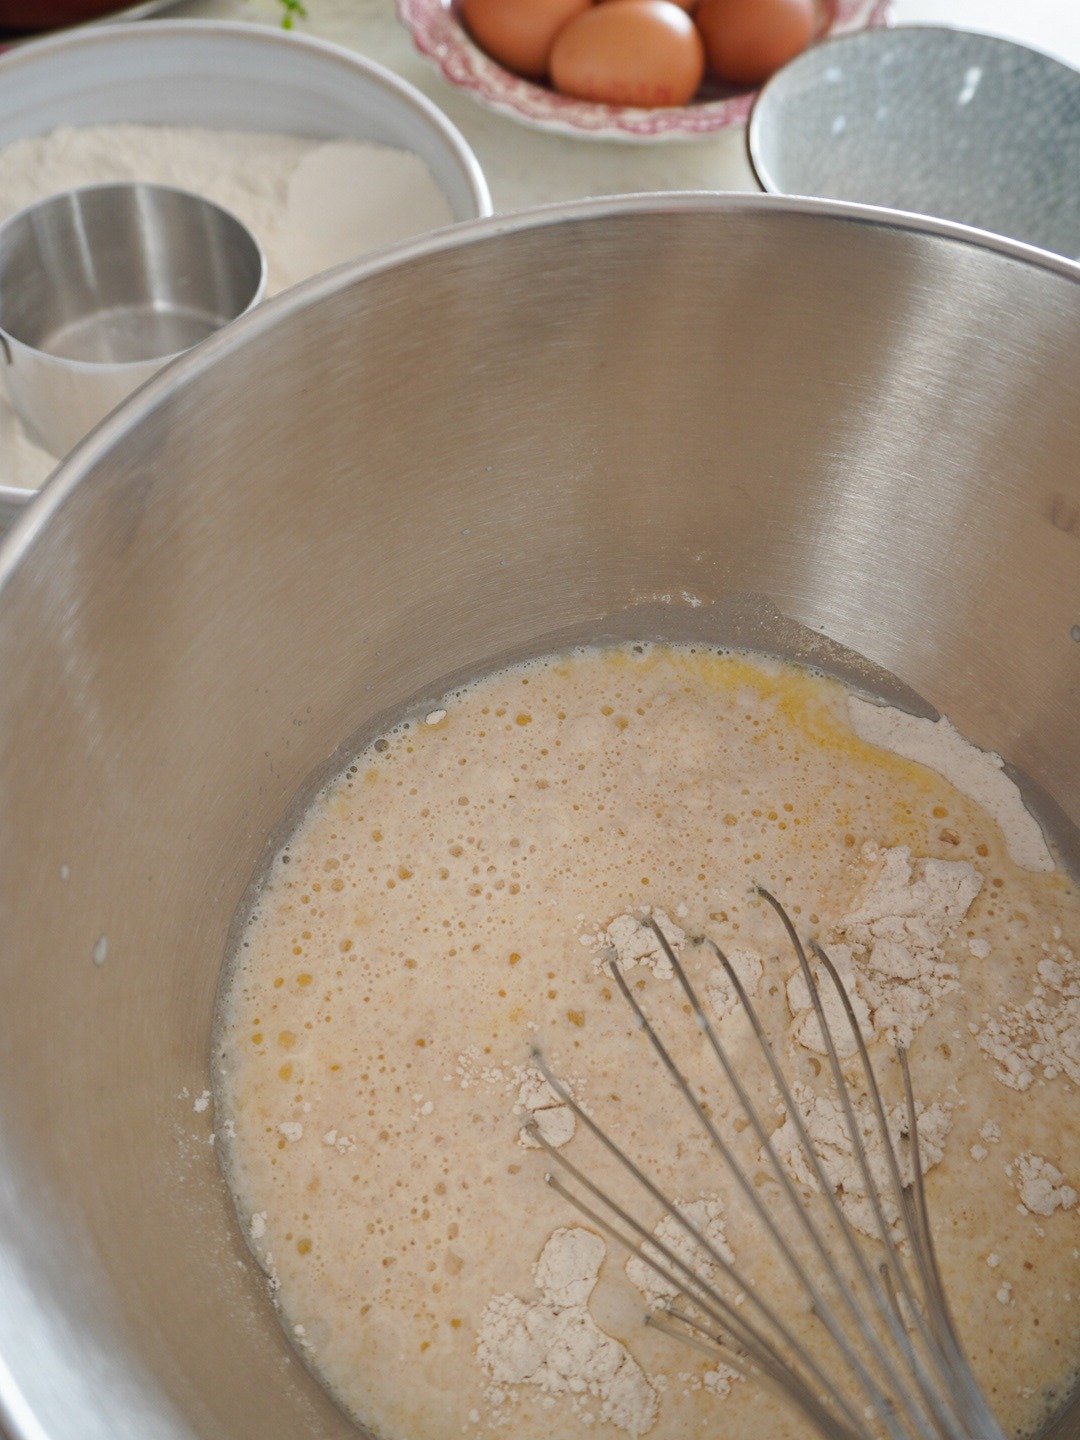 In a large bowl, combine 2 cup of flour, melted butter, milk, yeast, sugar and salt. Mix until blended.